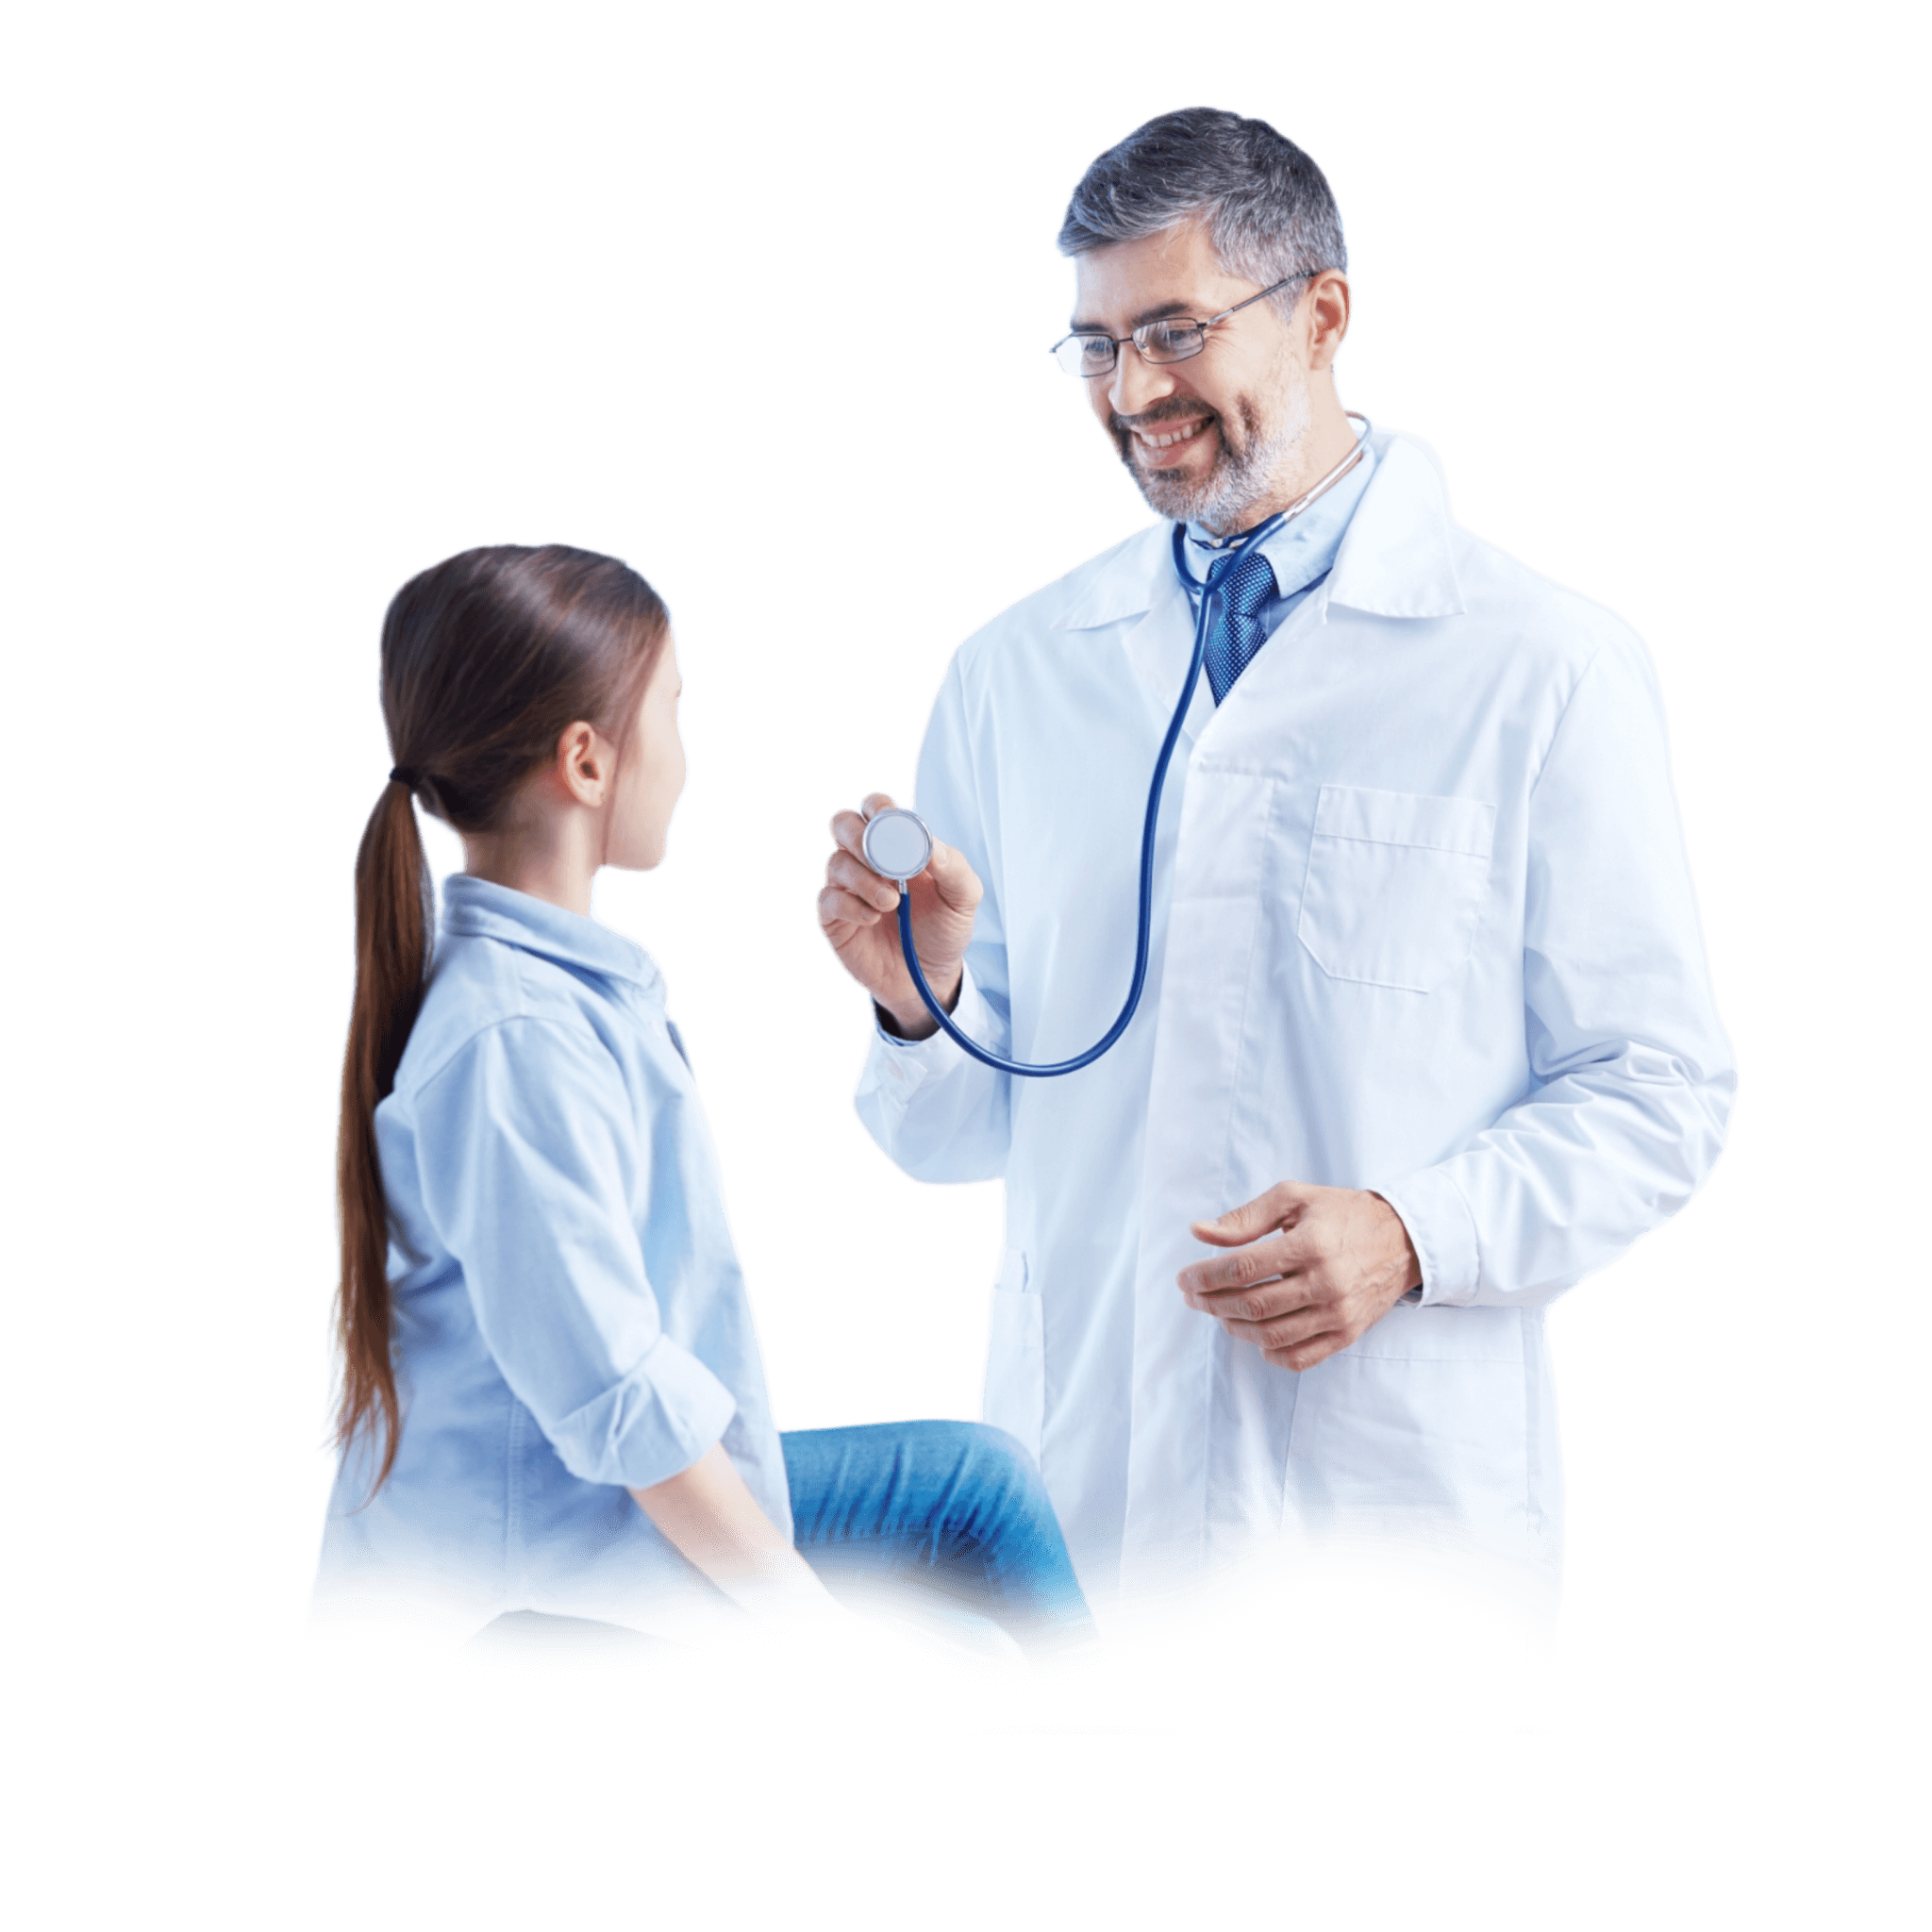 Find physicians for your team